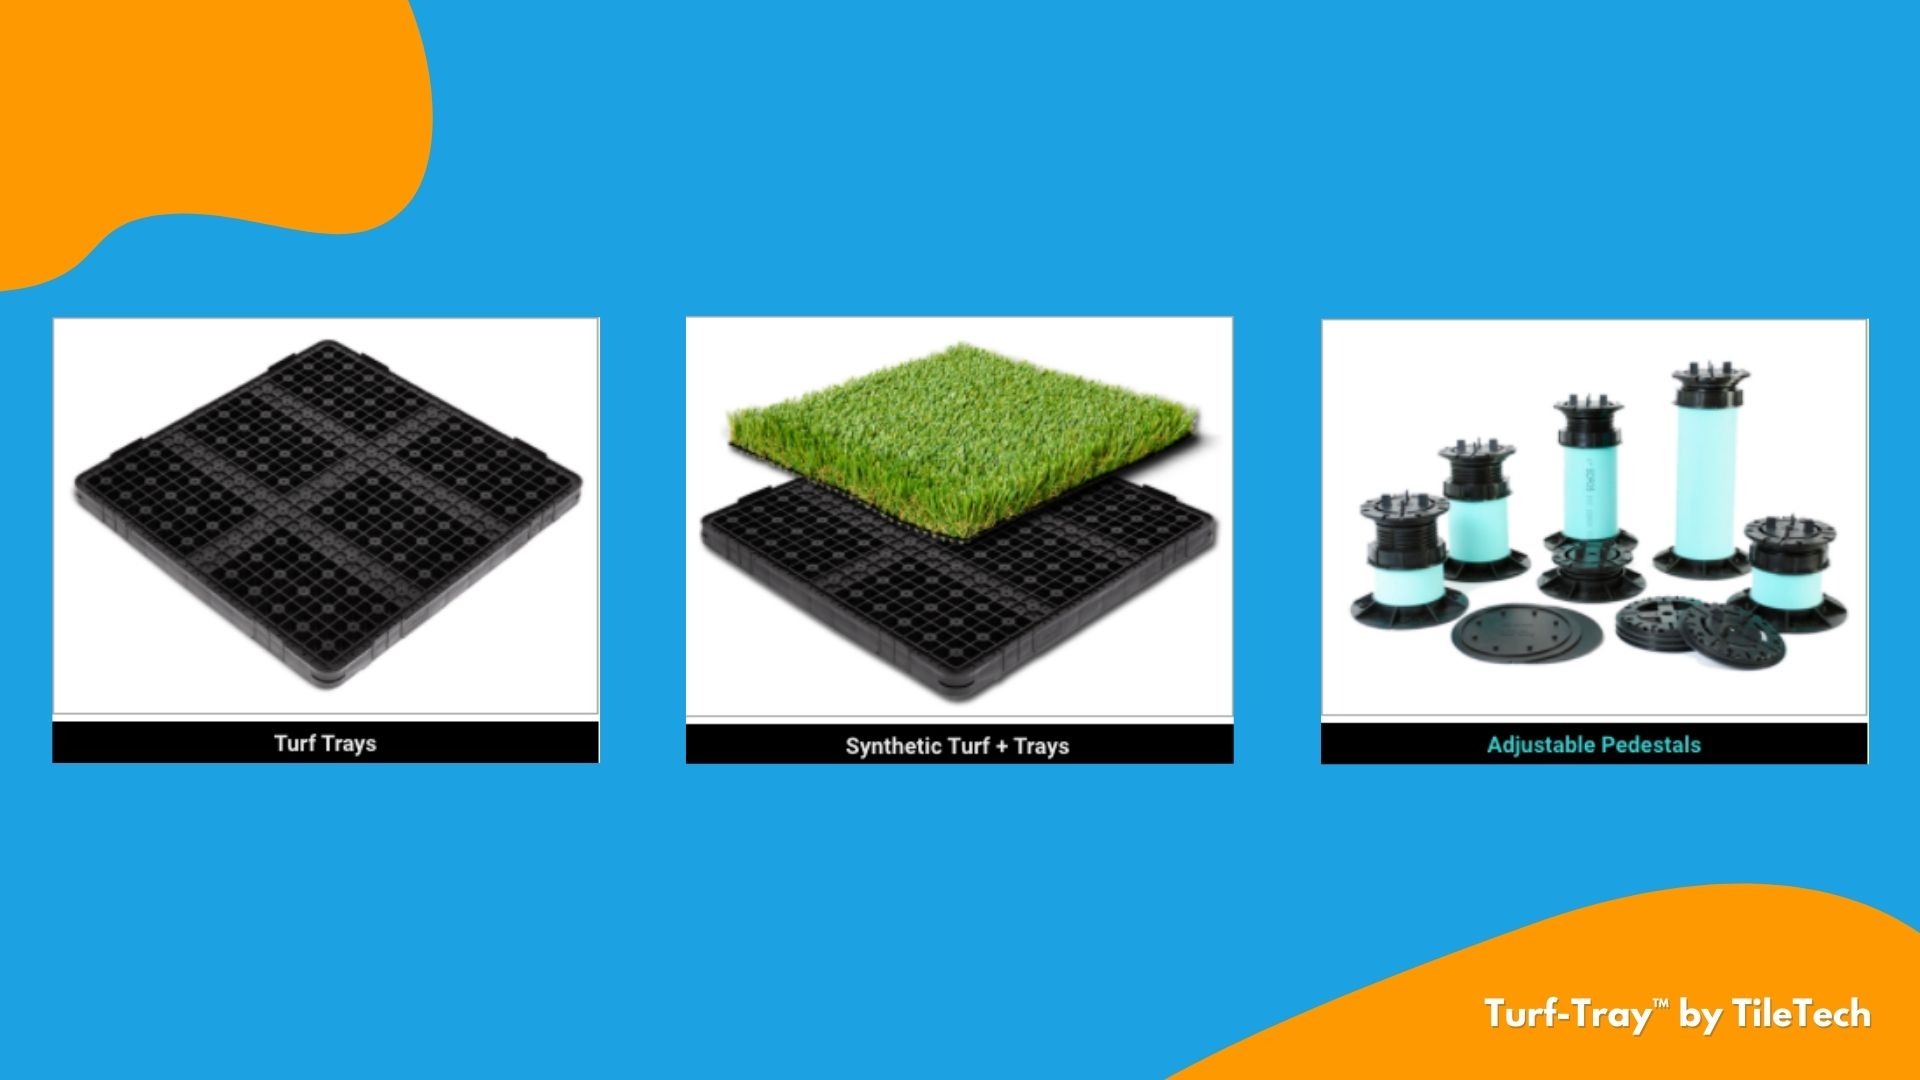 Turf Trays for commercial rooftop artificial grass applications by TileTech